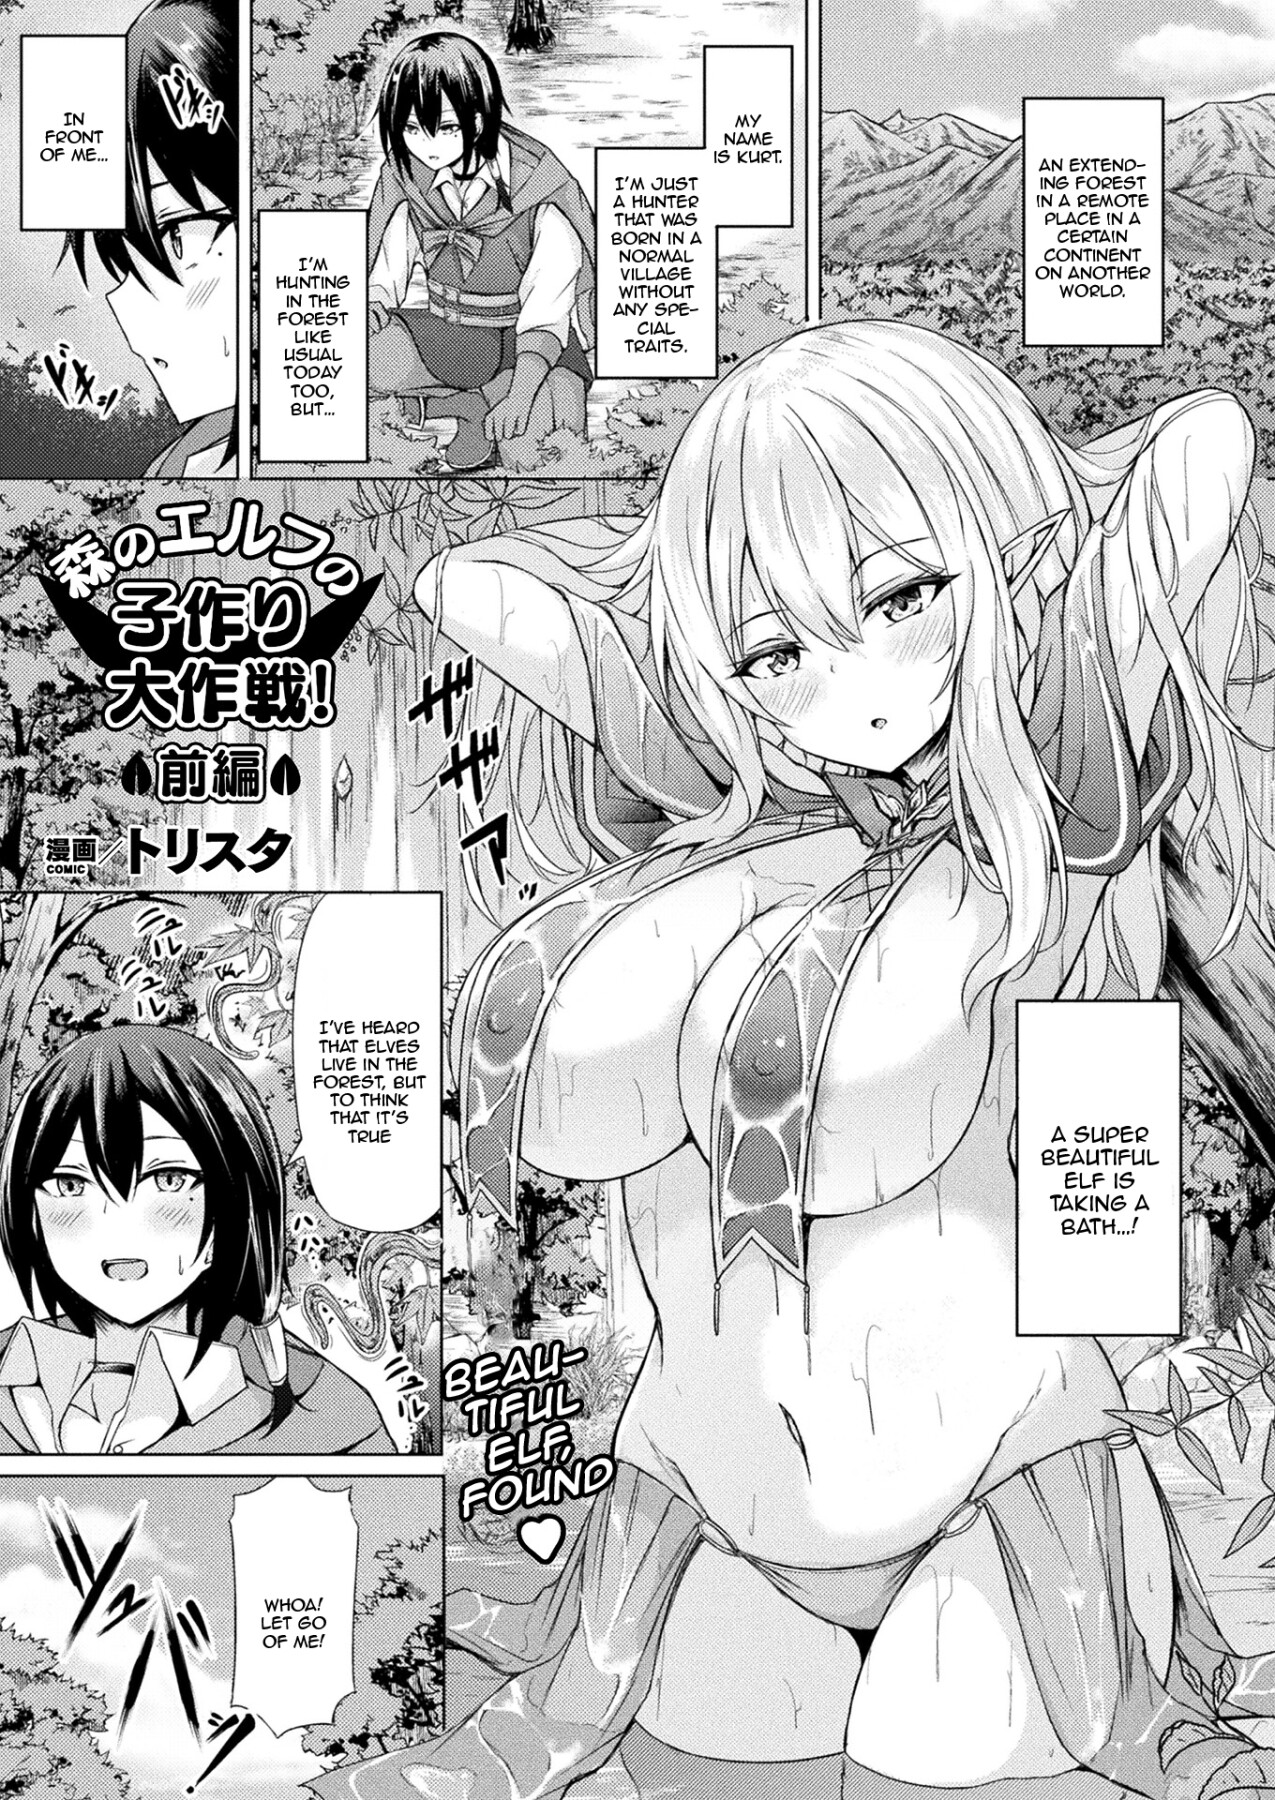 Hentai Manga Comic-The Great Forest Elf Reproduction Plan-Read-1